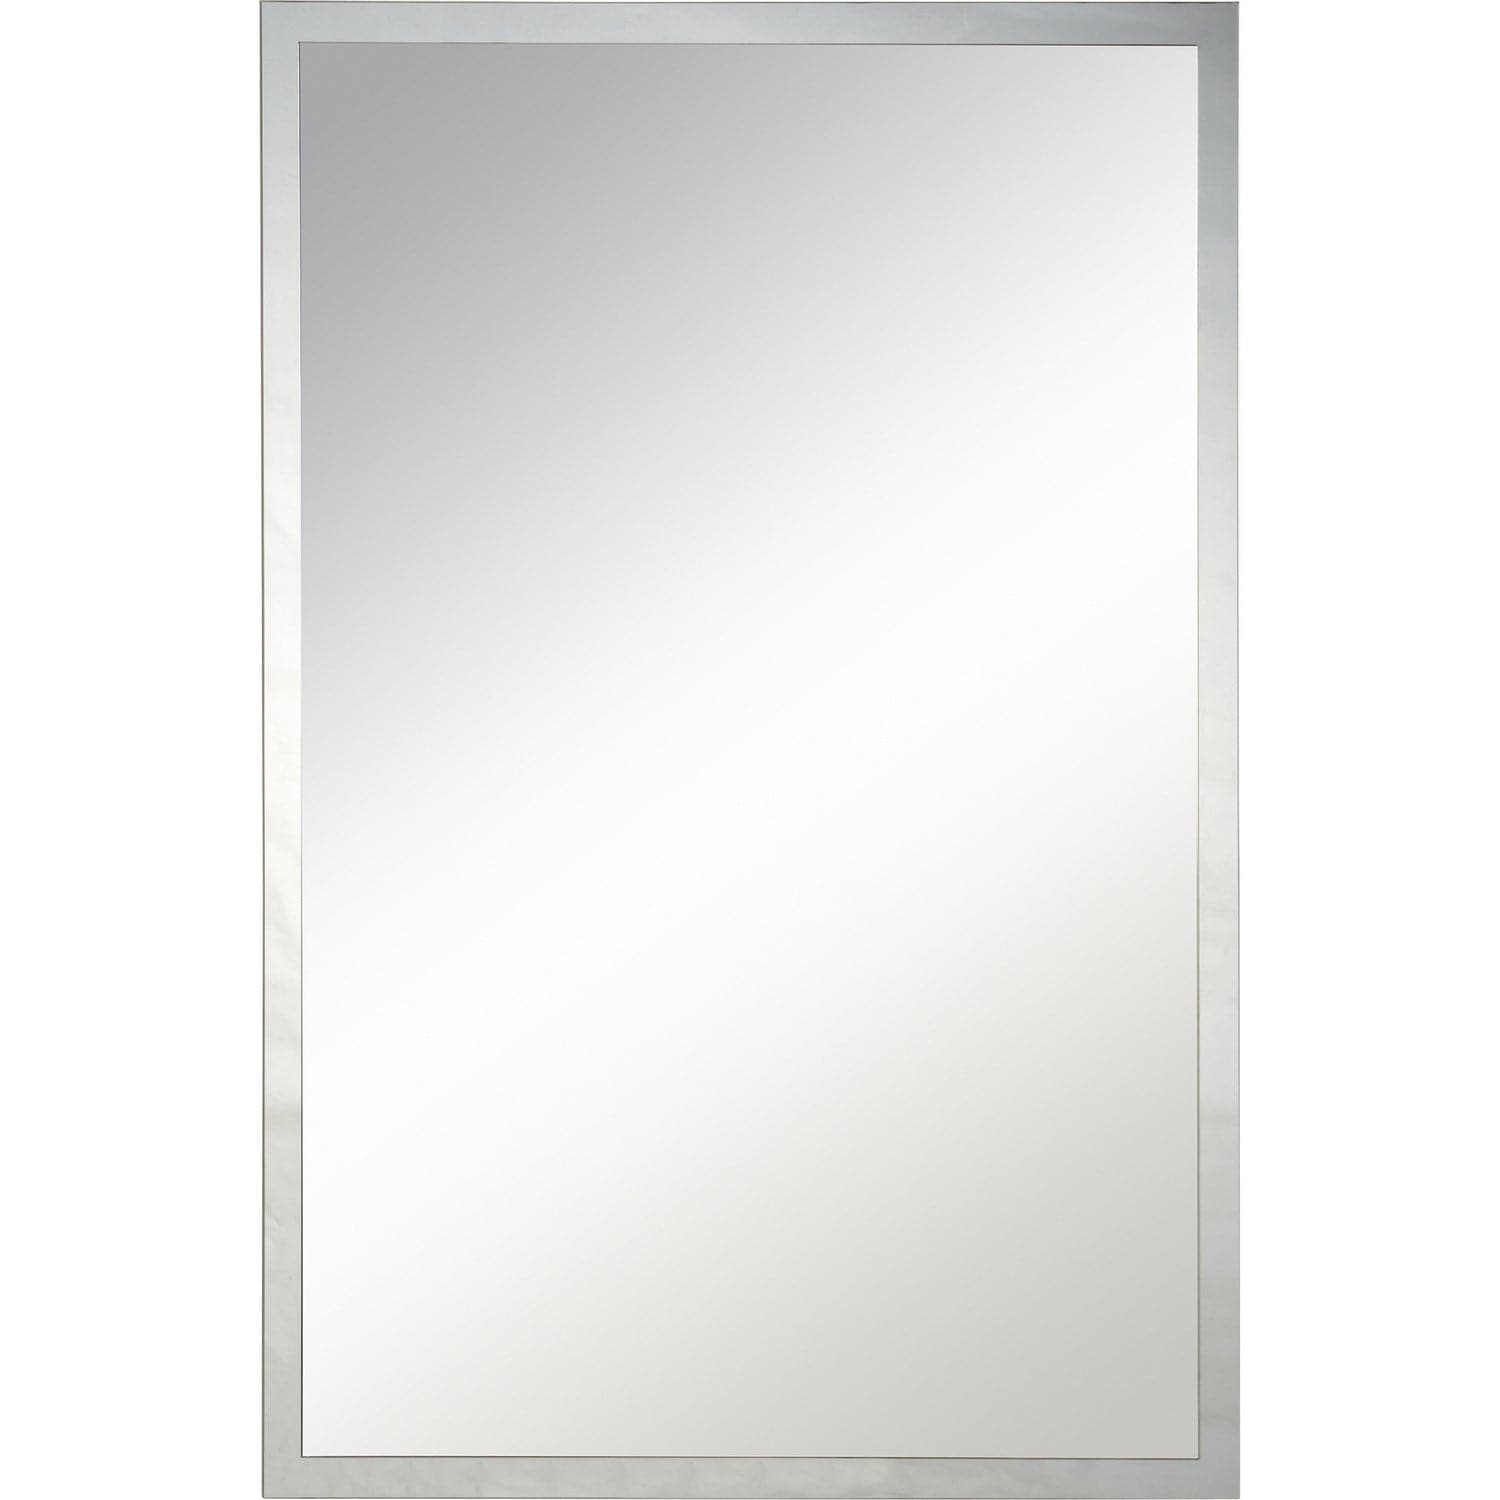 Renwil - MT2253 - Mirrors/Pictures - Mirrors-Rect./Sq.